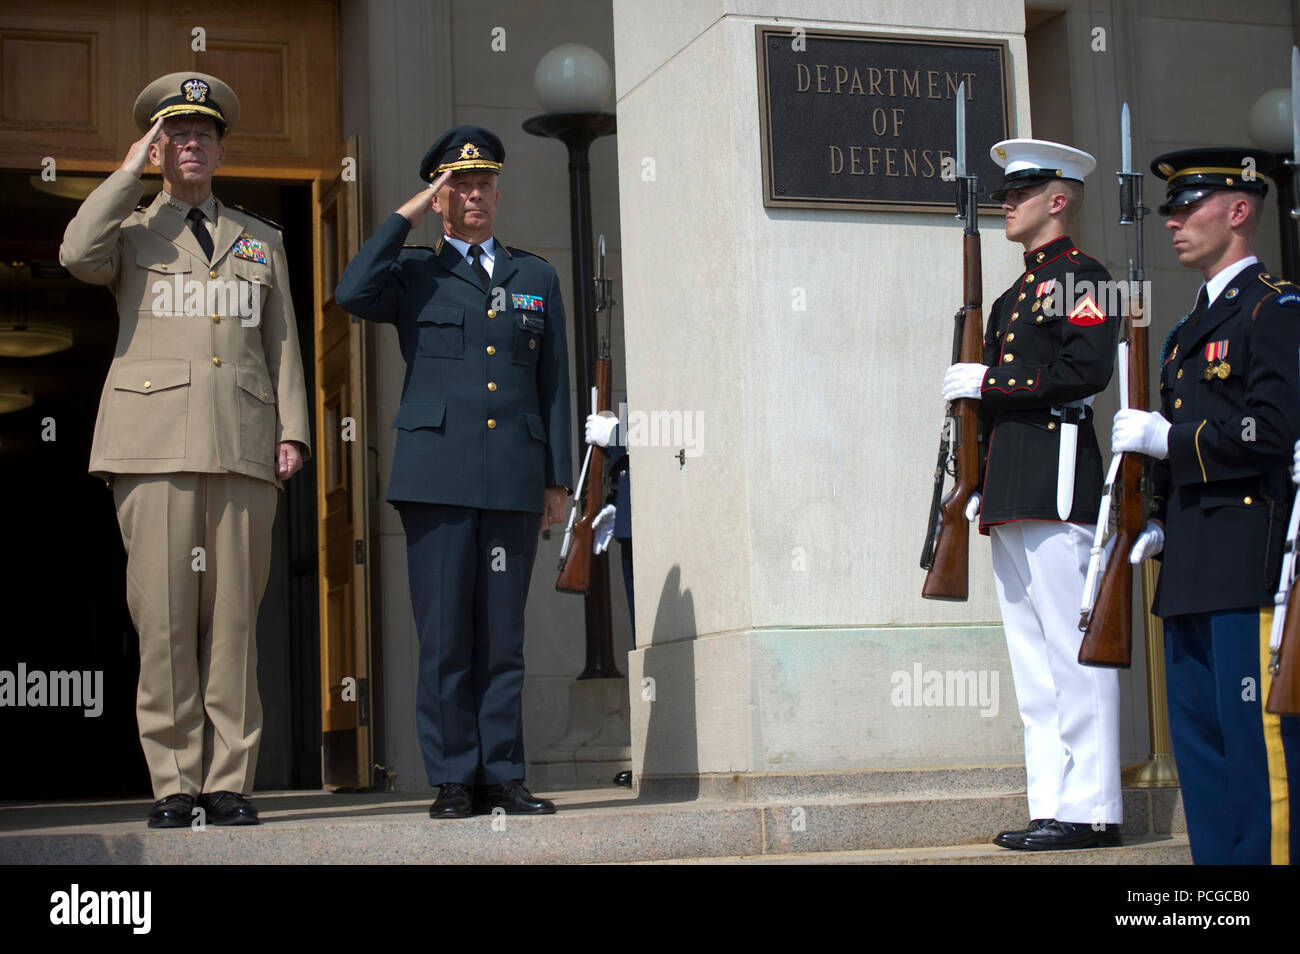 Chairman of the Joint Chiefs of Staff Adm. Mike Mullen, U.S. Navy, welcomes Supreme Commander of the Swedish Armed Forces Gen. Sverker Goranson to the Pentagon on Aug. 5, 2010. Stock Photo